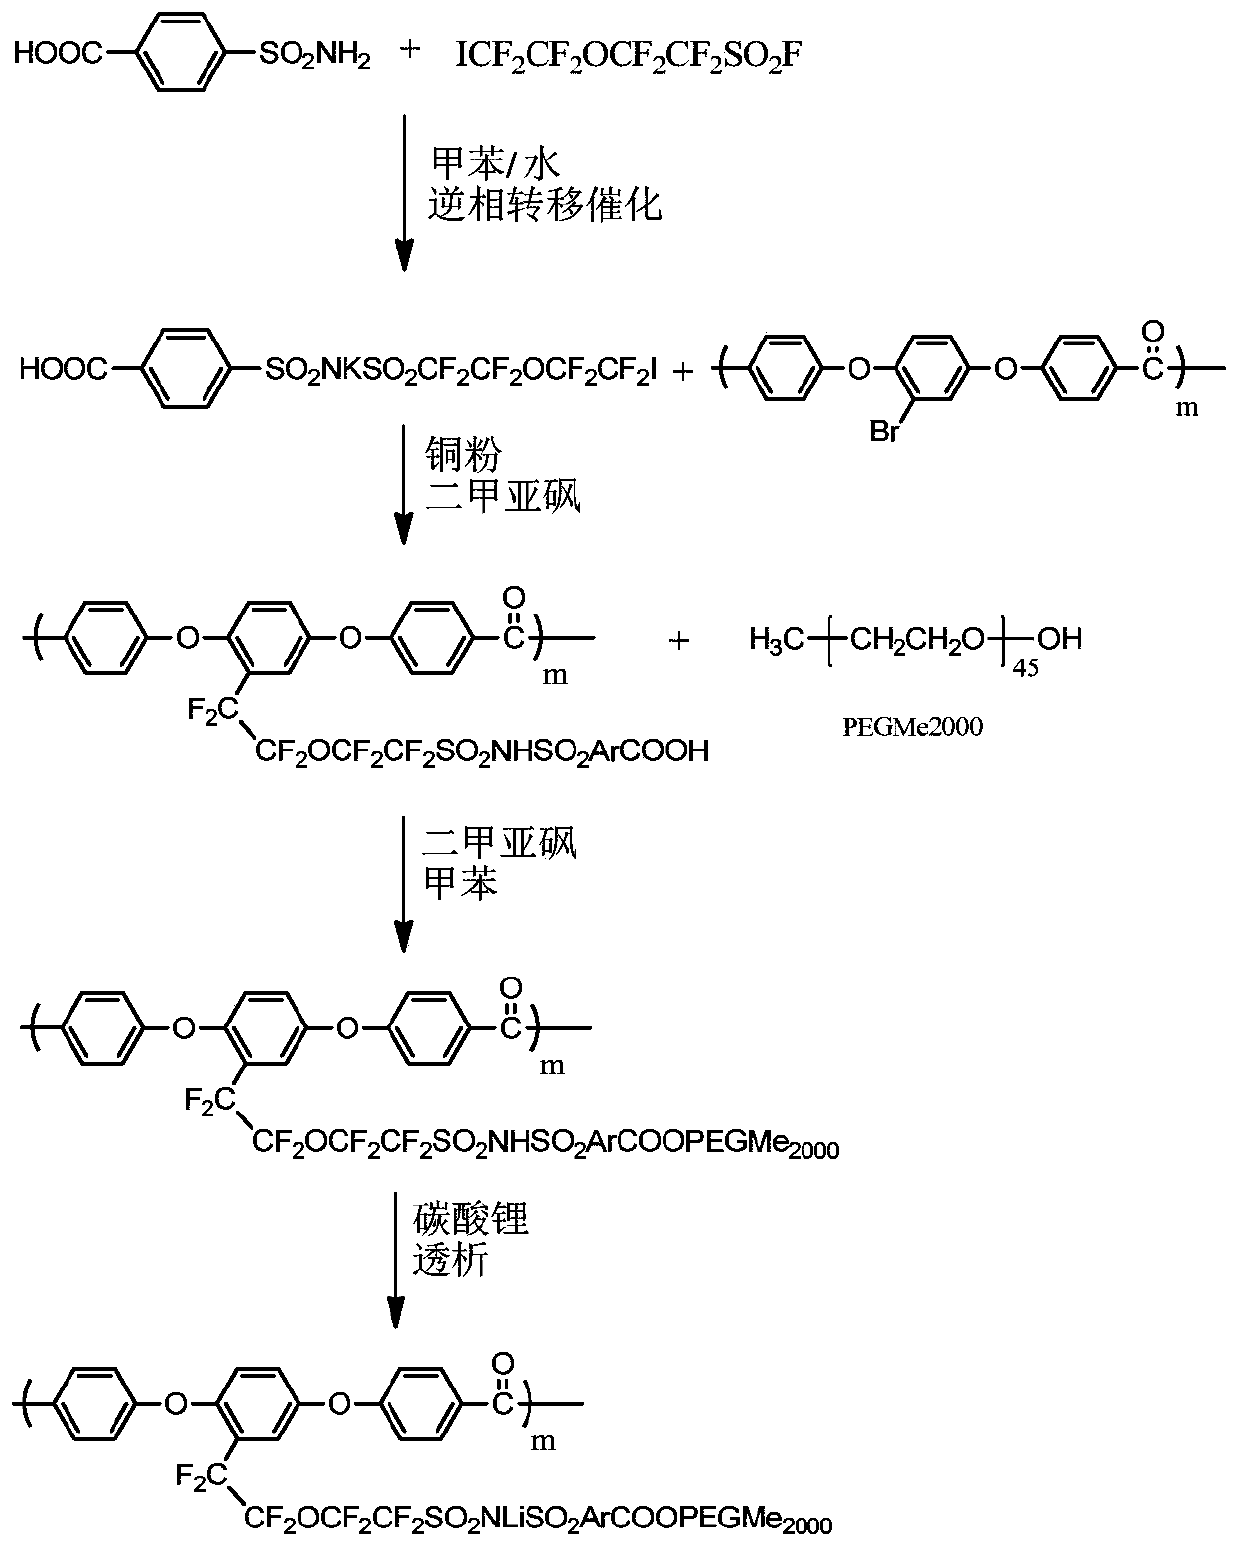 Self-plasticized fluoropolymer lithium ion conductor, its preparation method and application